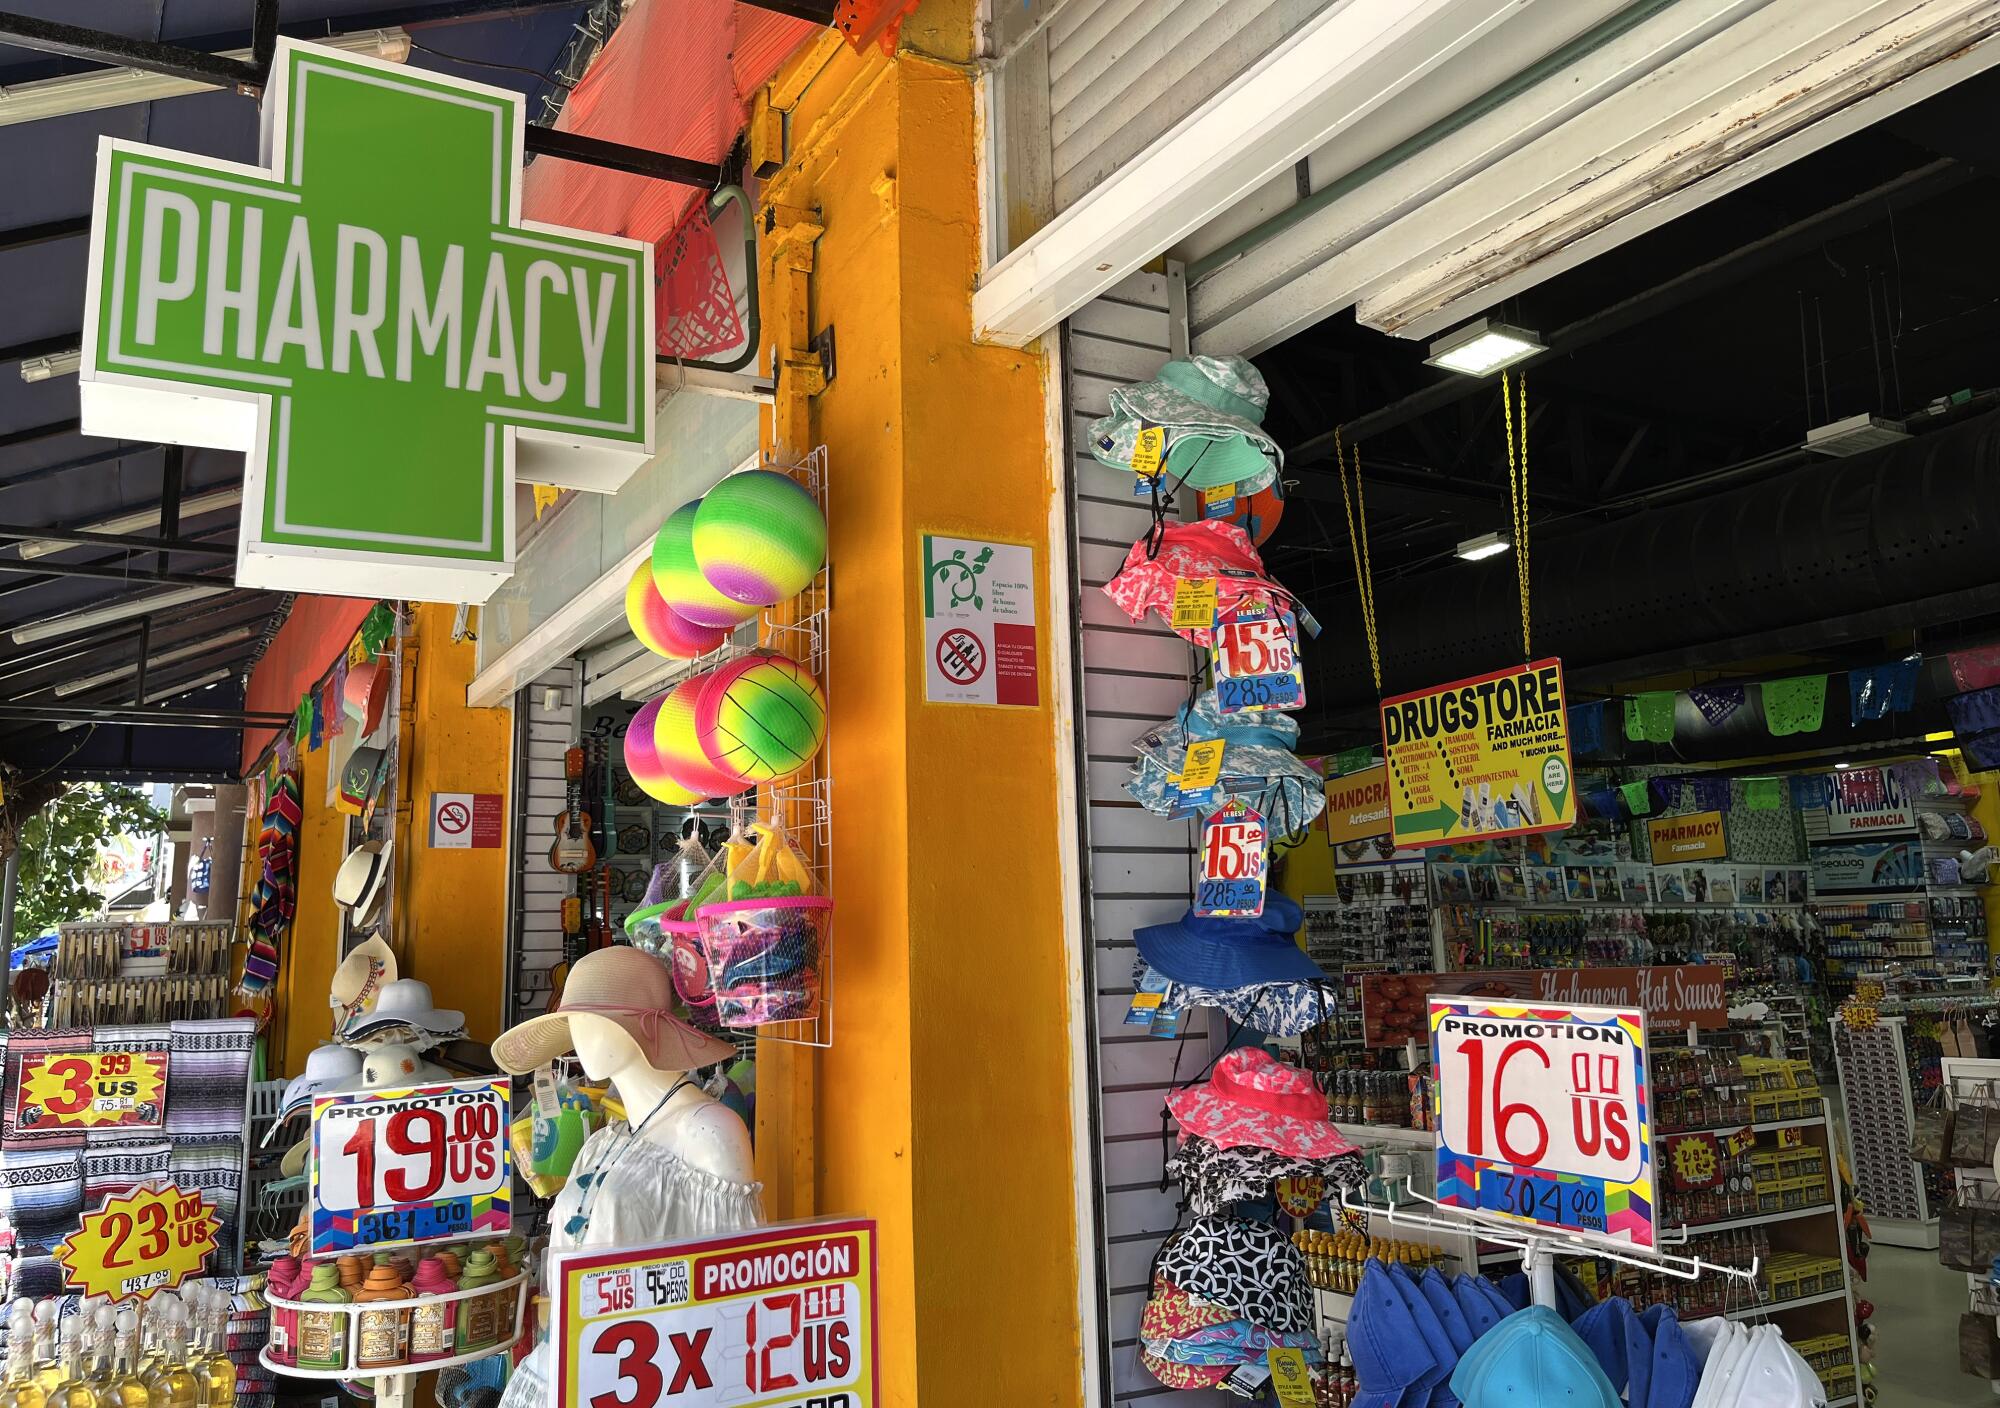 A pharmacy sign hangs over assorted merchandise outside a store.